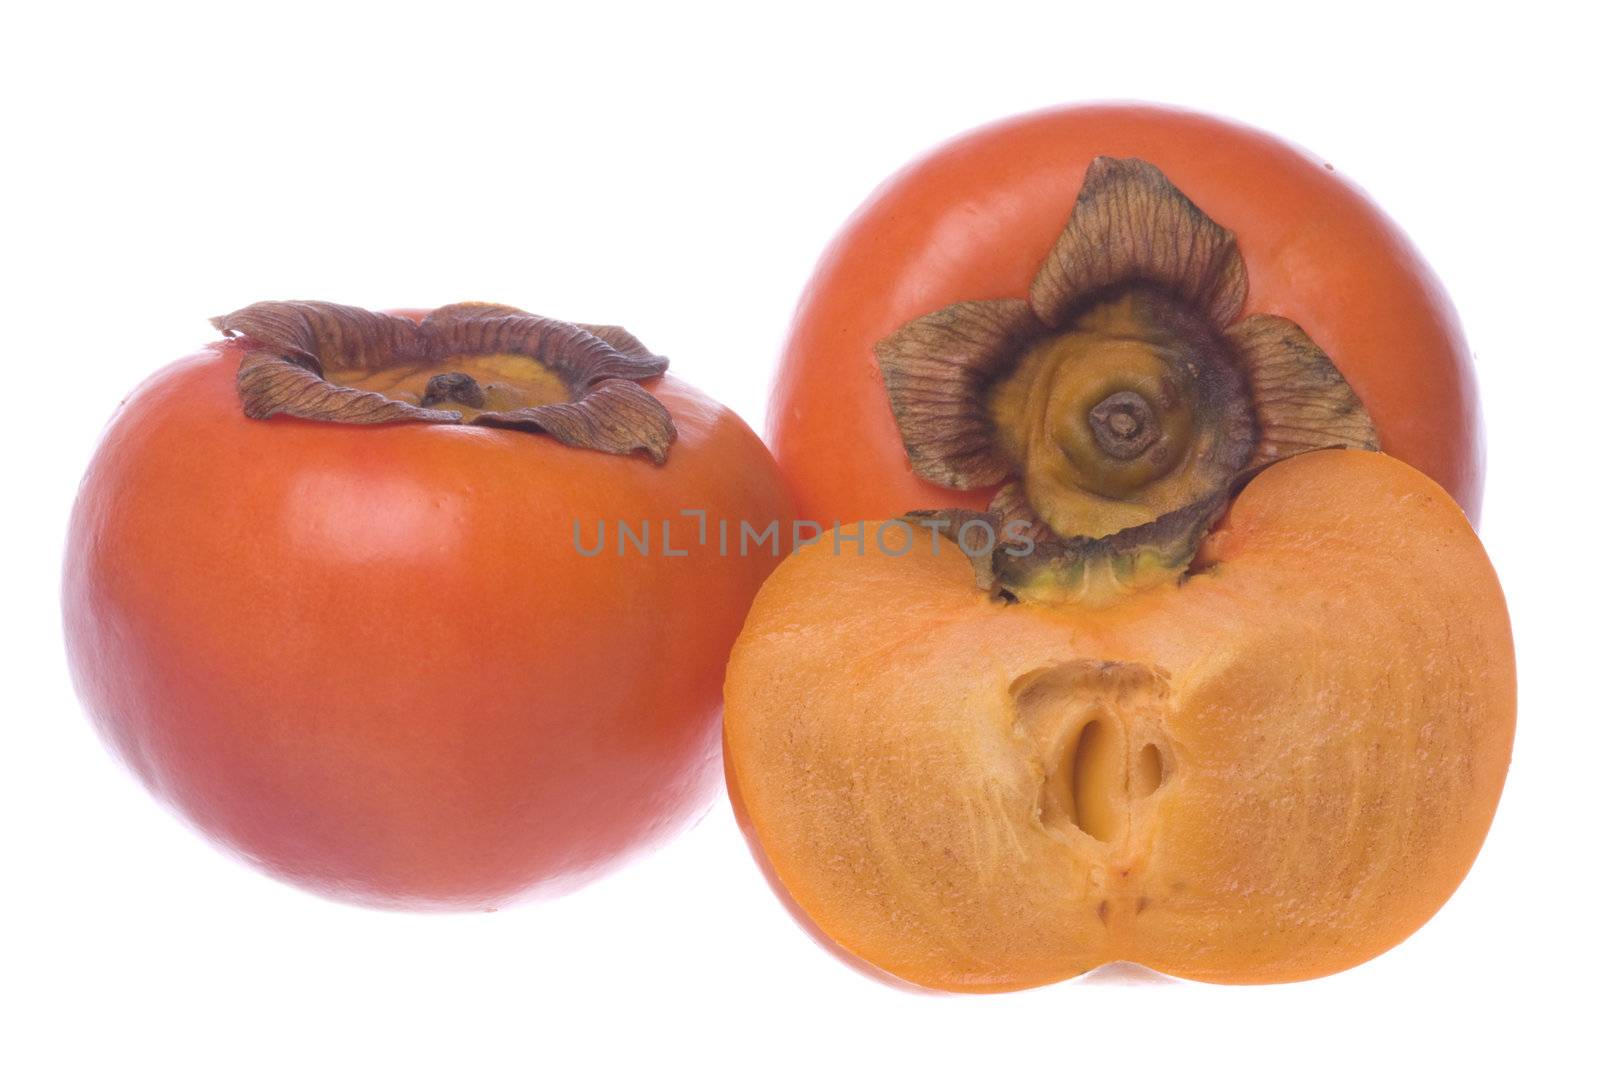 Isolated image of fresh persimmons.